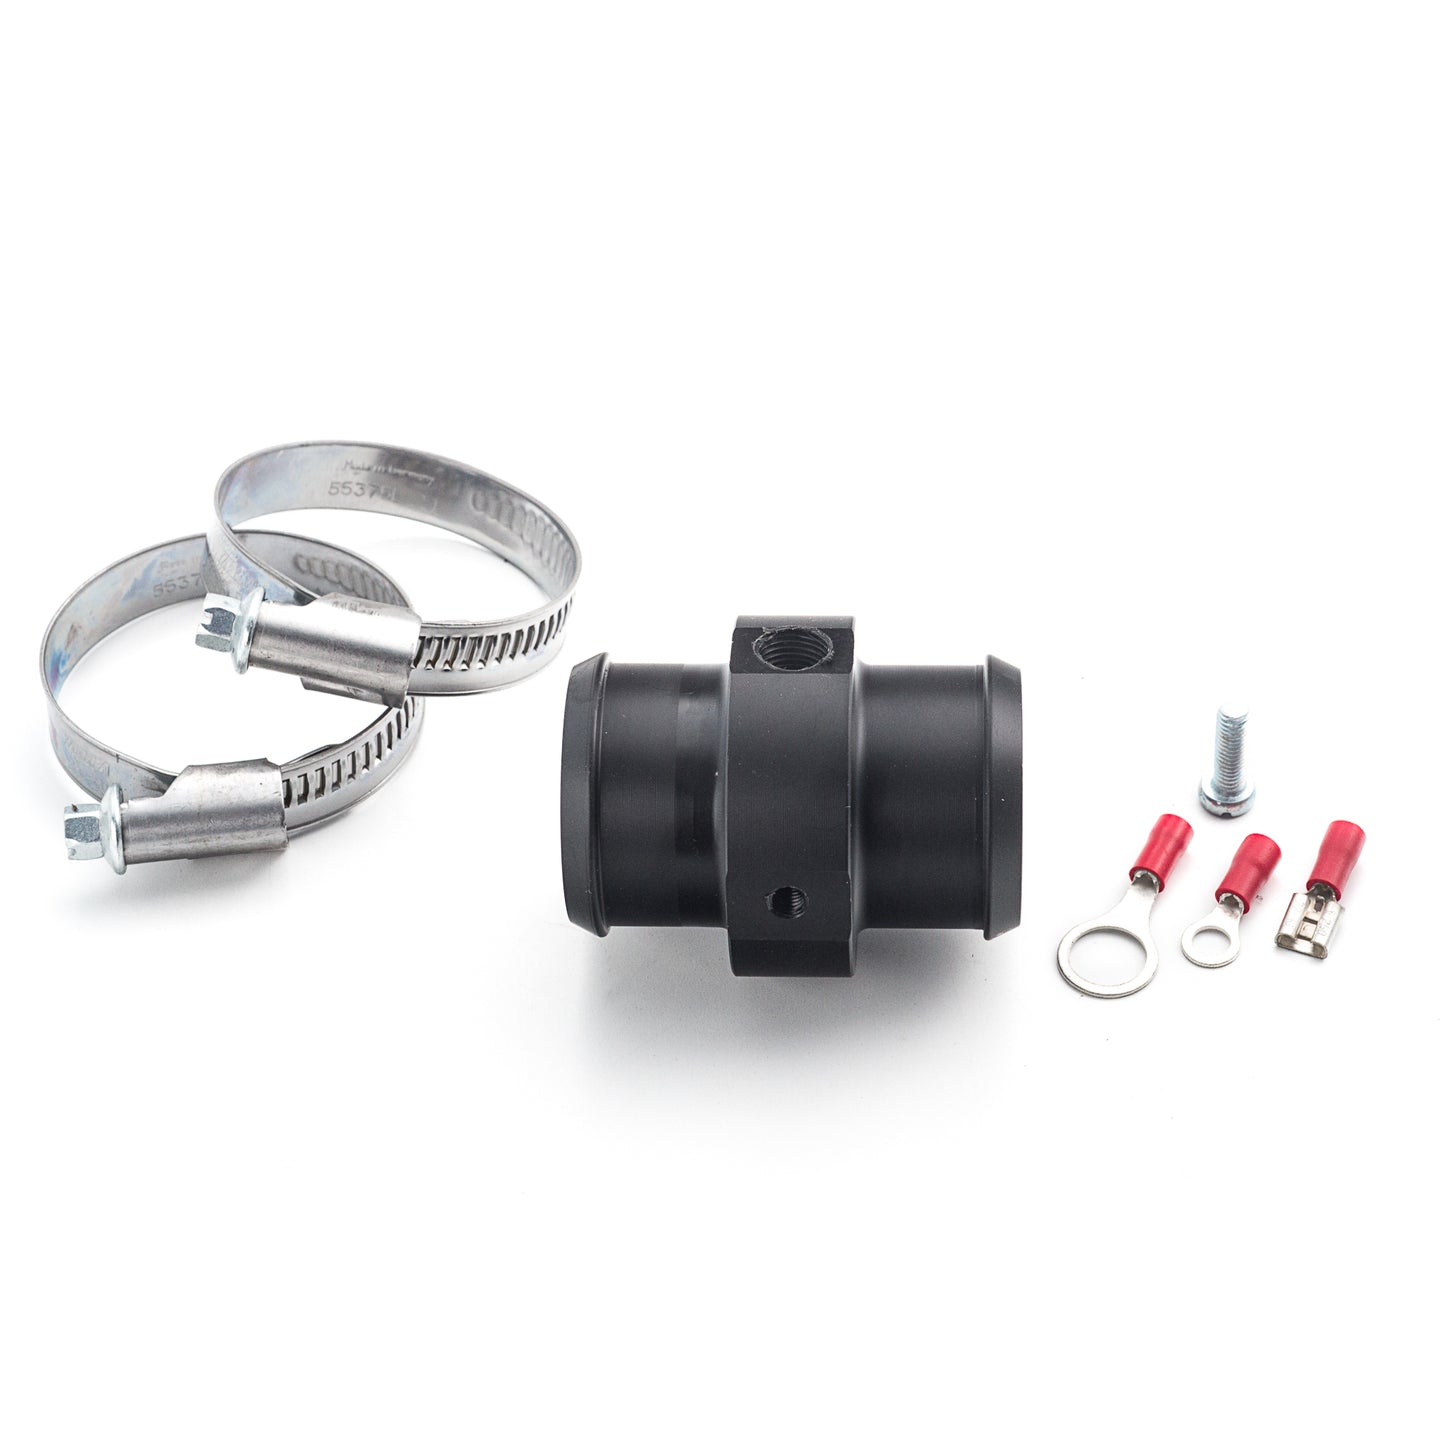 38mm (1.5") Coolant Hose Adapter for Coolant Temperature and Level Measurements